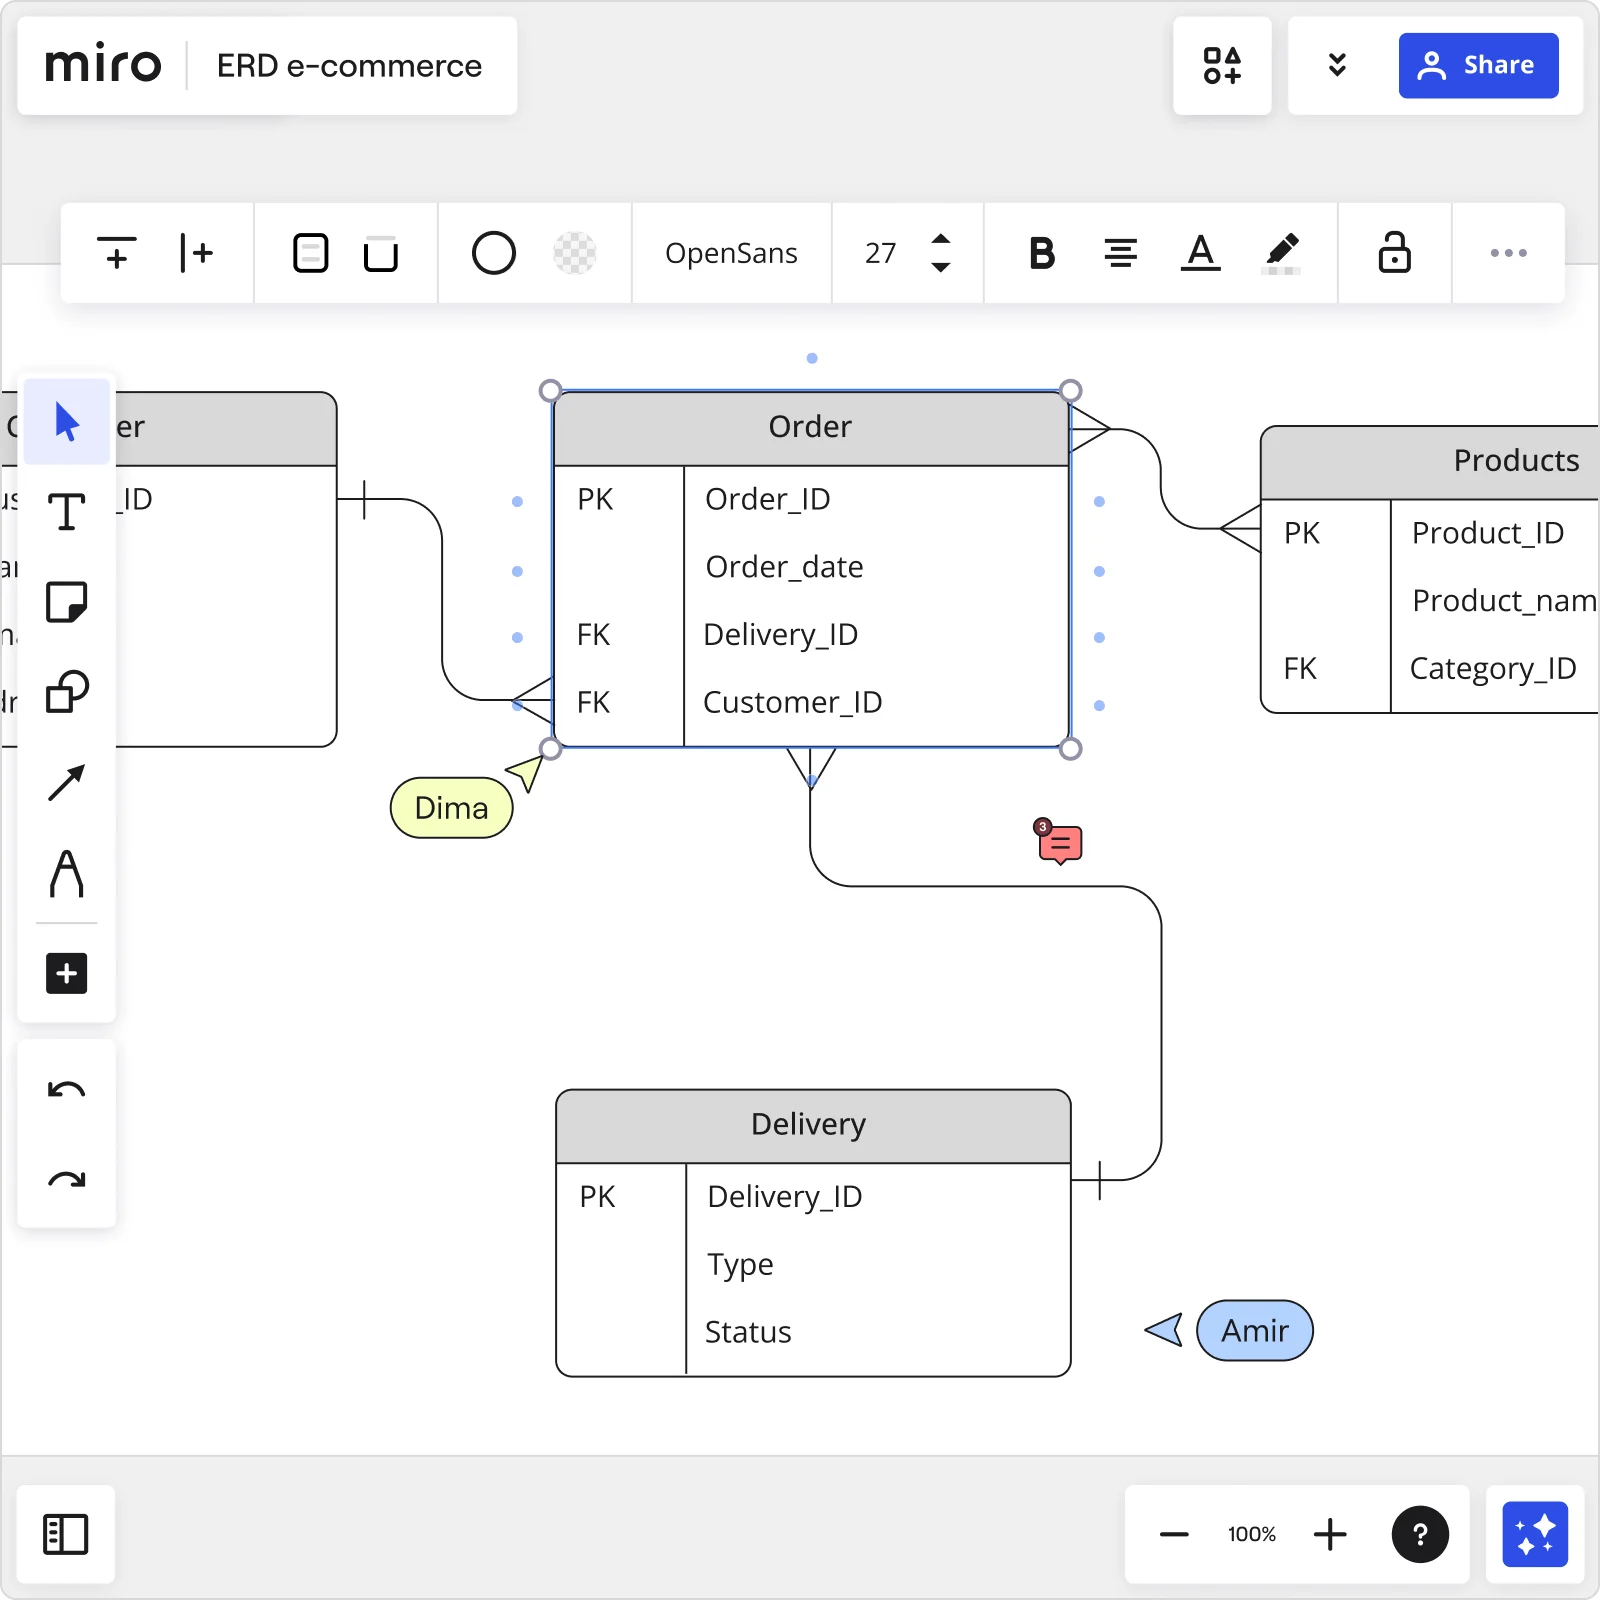 An image showing how to use Miro's data base design tool